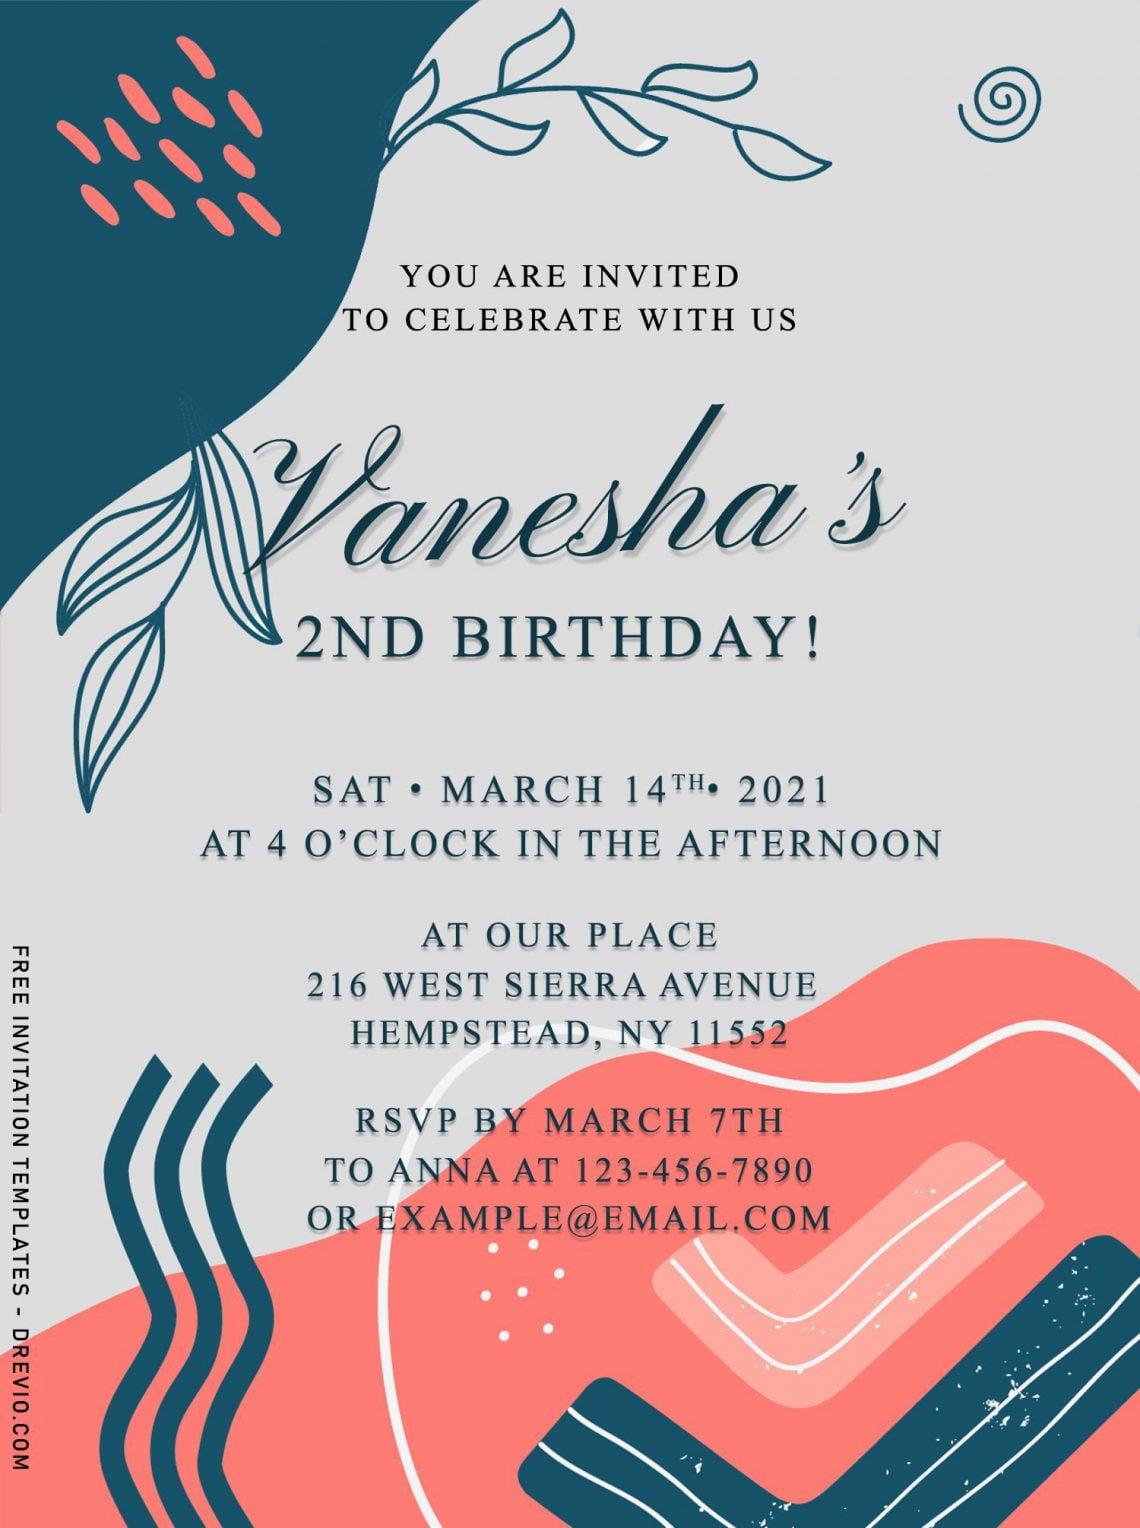 9-creative-memphis-style-birthday-invitation-templates-for-your-kids